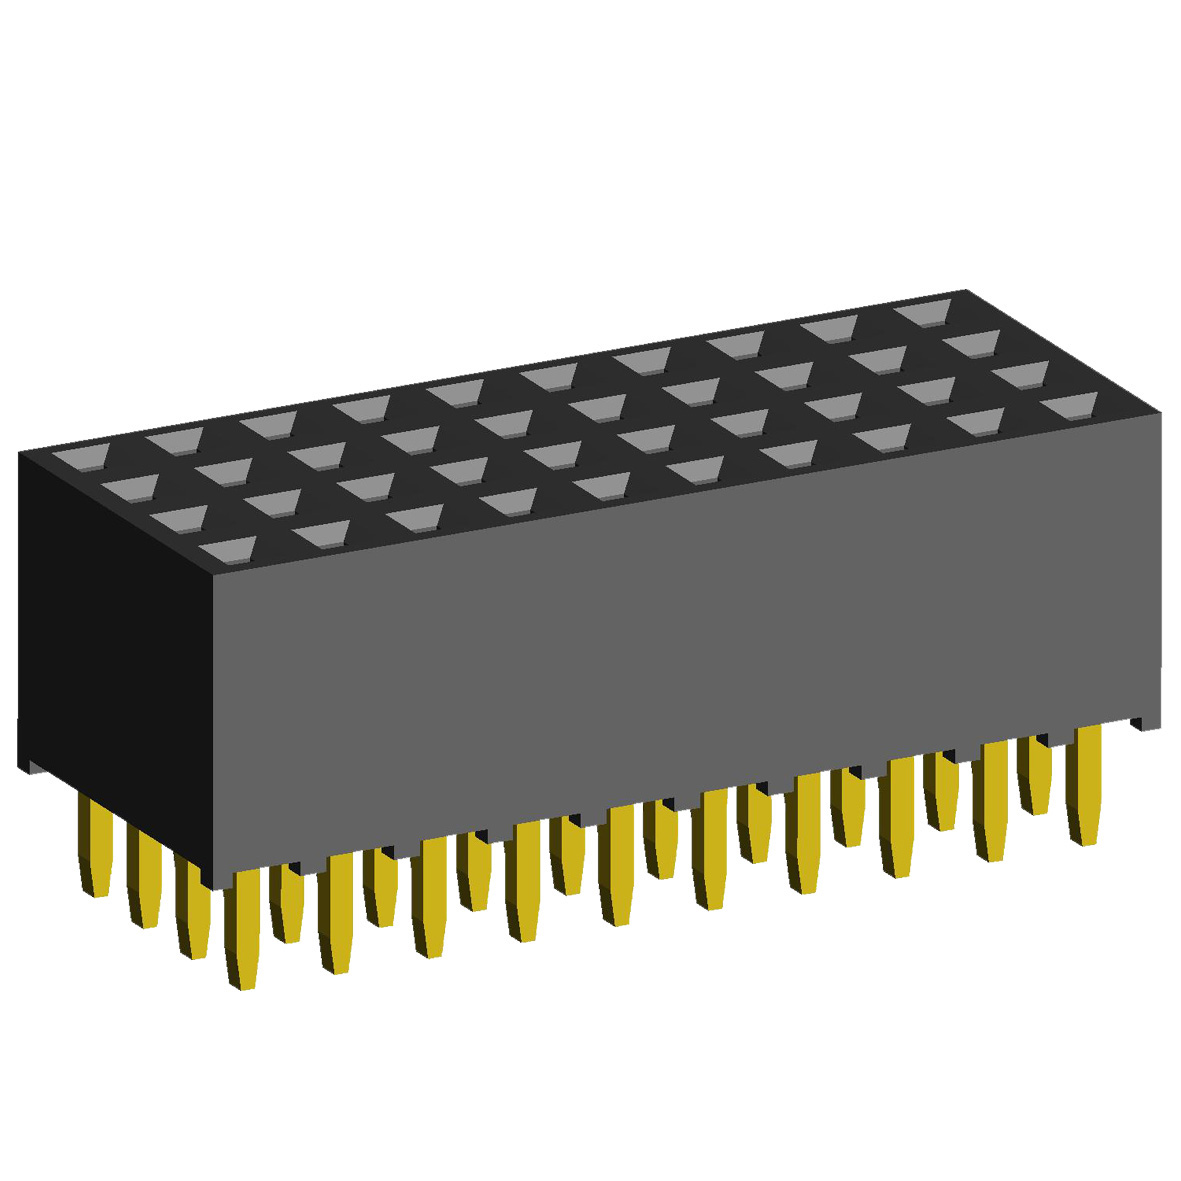 1999S-XXXG-635 series, four-row sockets straight to the Board for mounting holes, pitch 2,0x2,0 mm, 4x40 pins